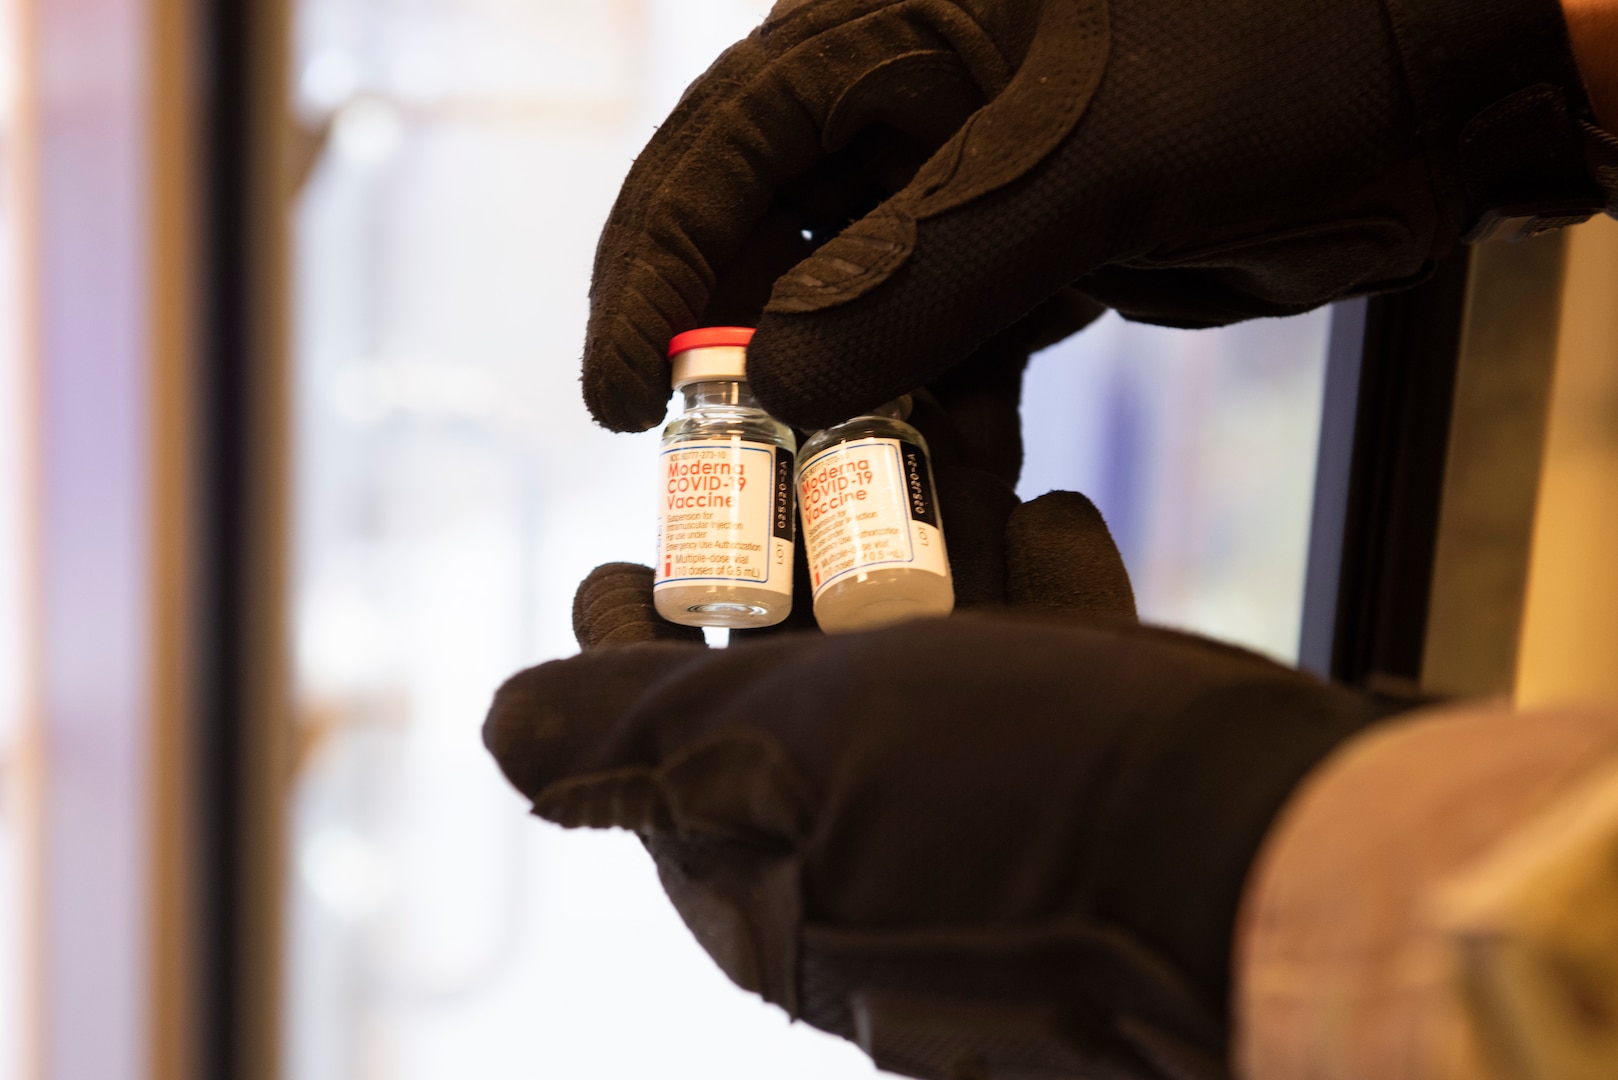 Two small bottles with labels are held by two hands in black gloves.